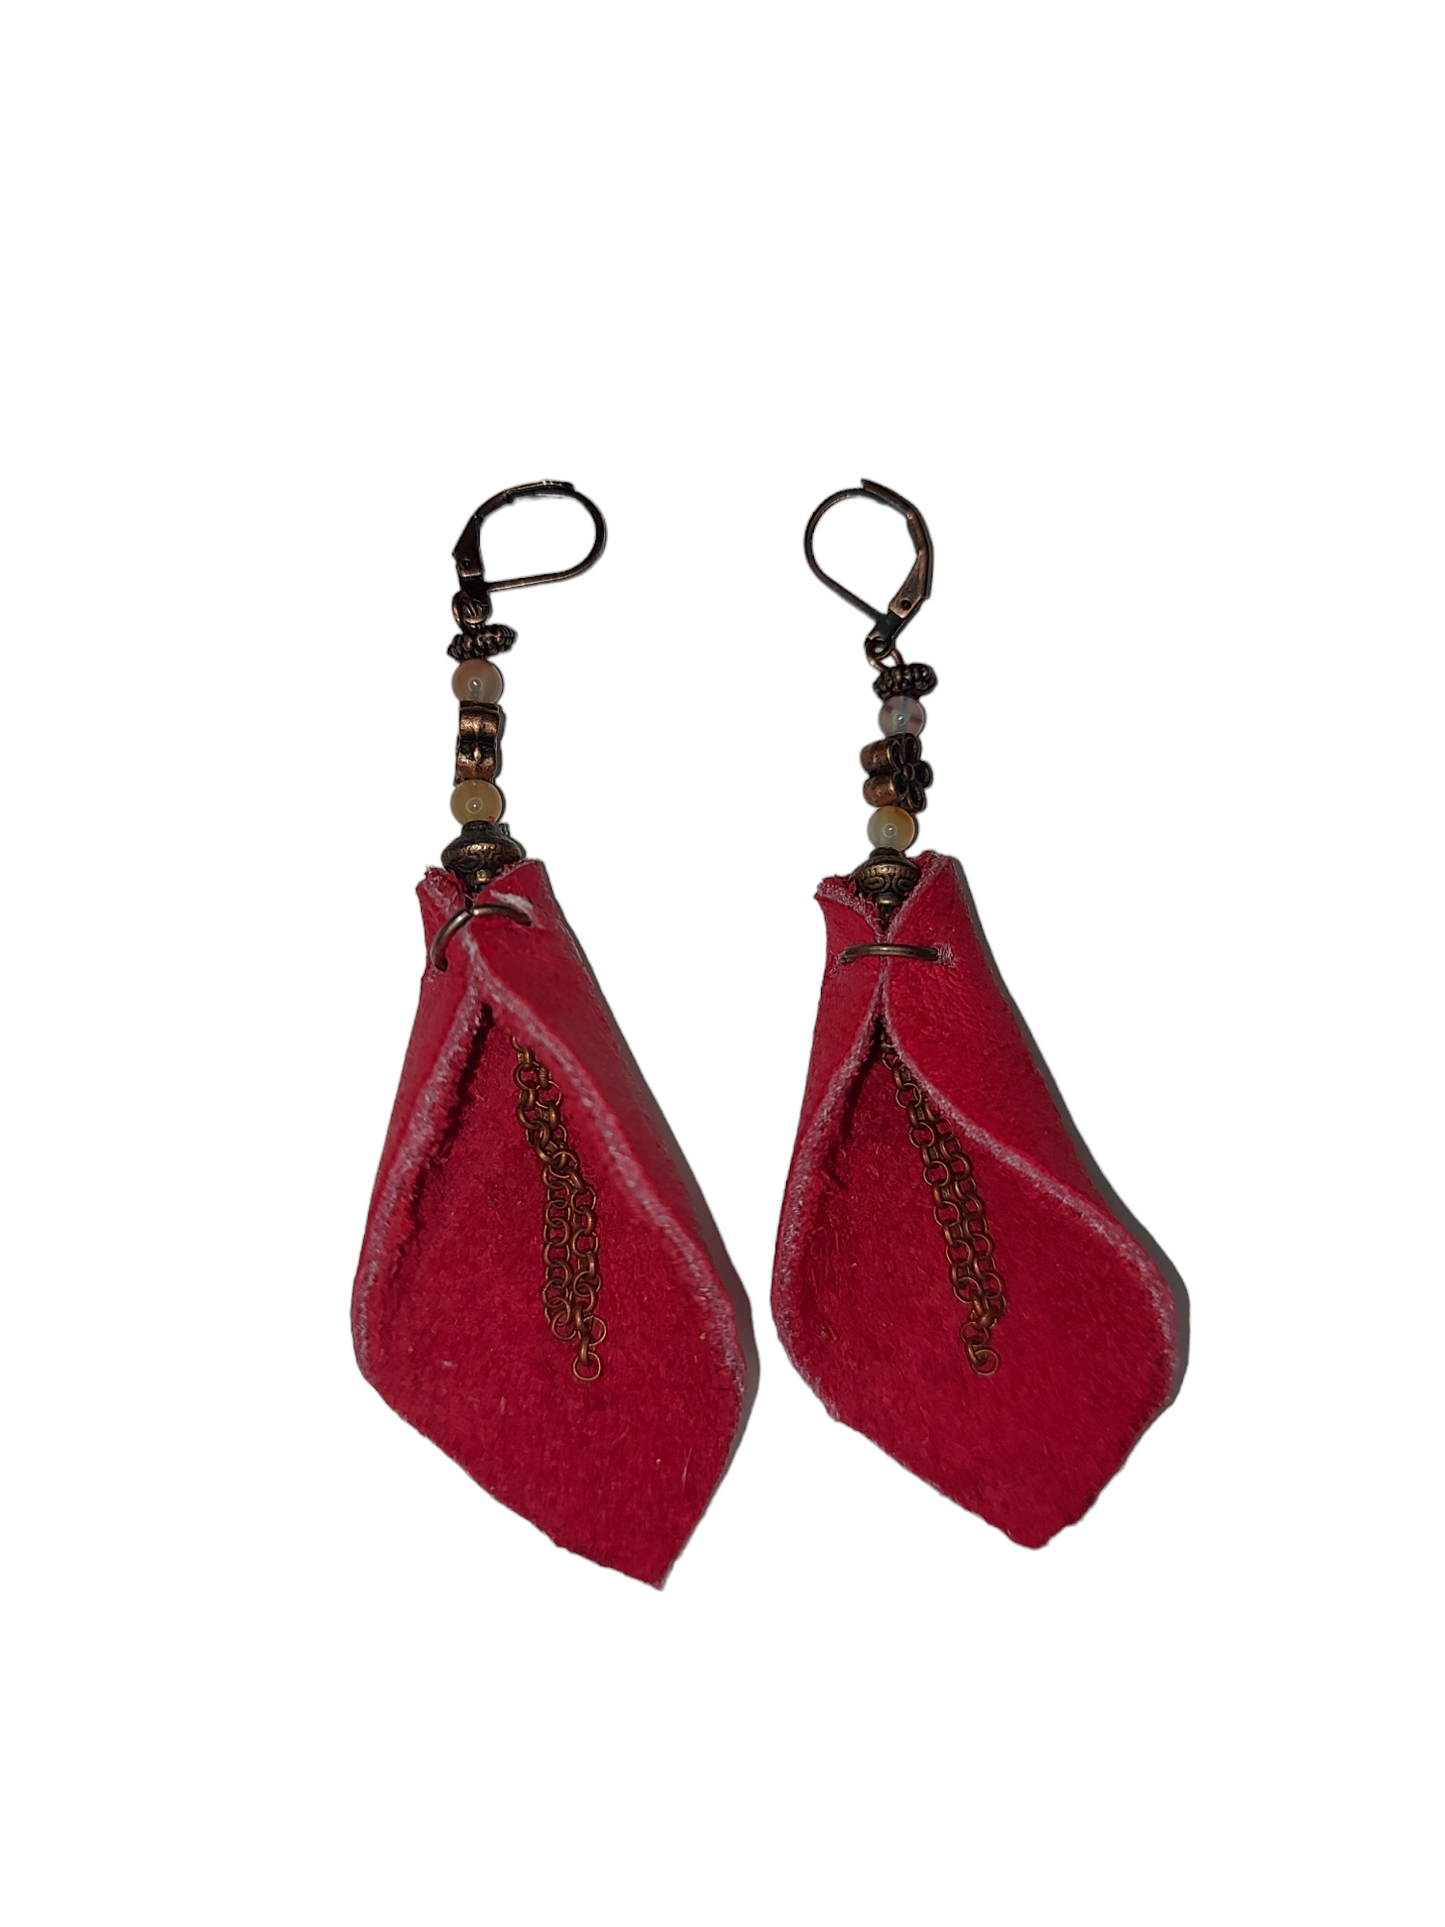 Moose Leather and Agate Copper Earrings